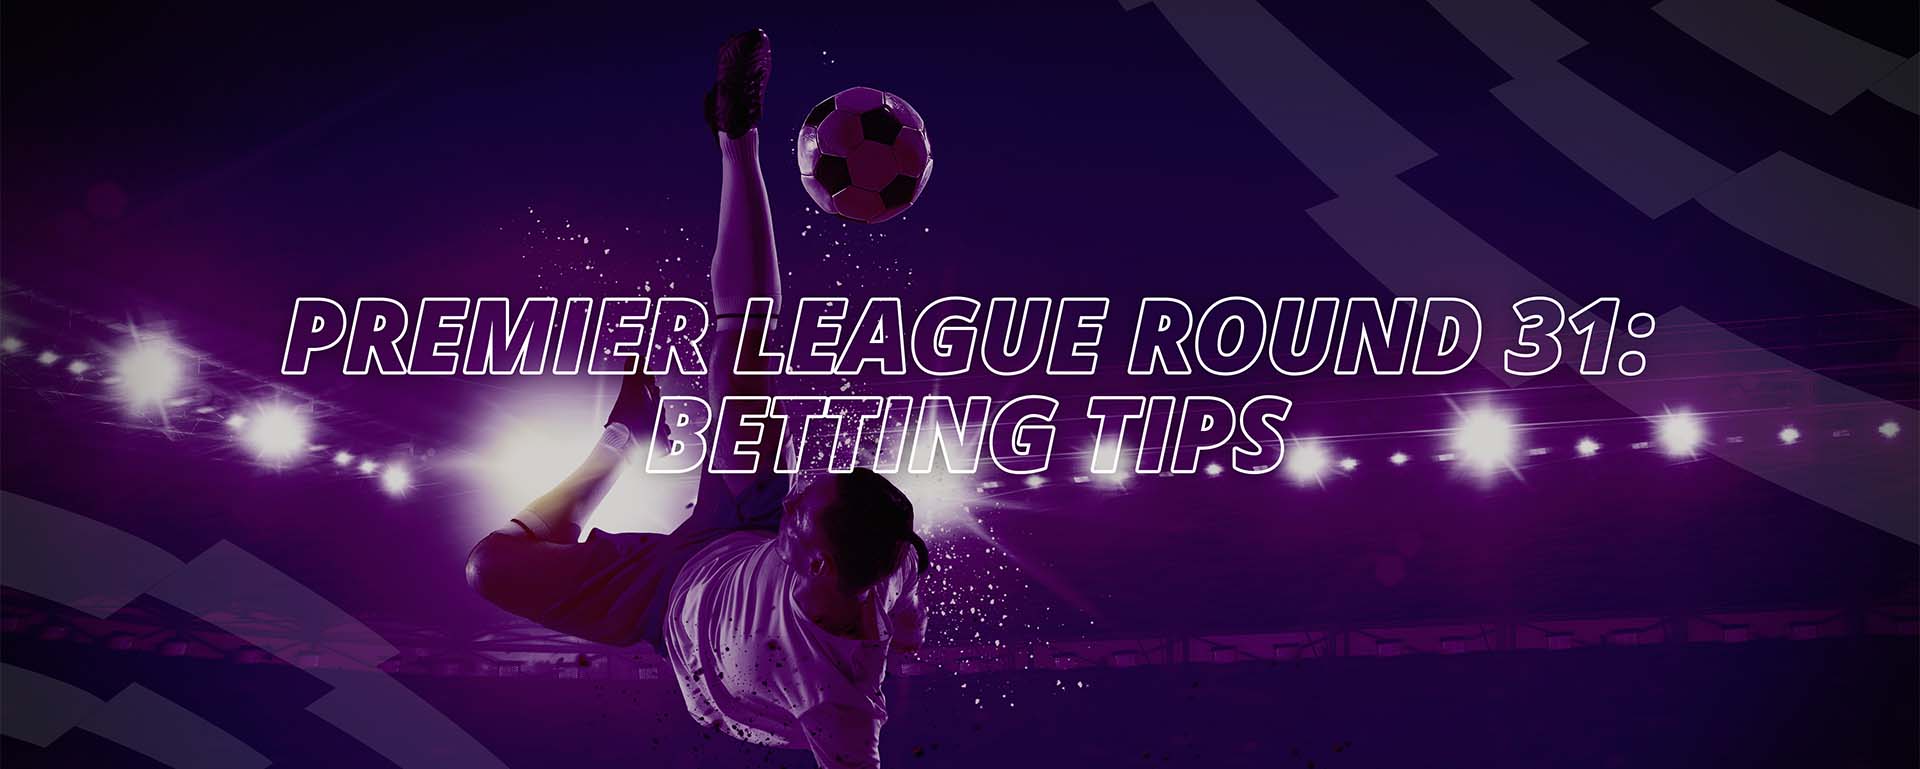 PREMIER LEAGUE ROUND 31: BETTING TIPS